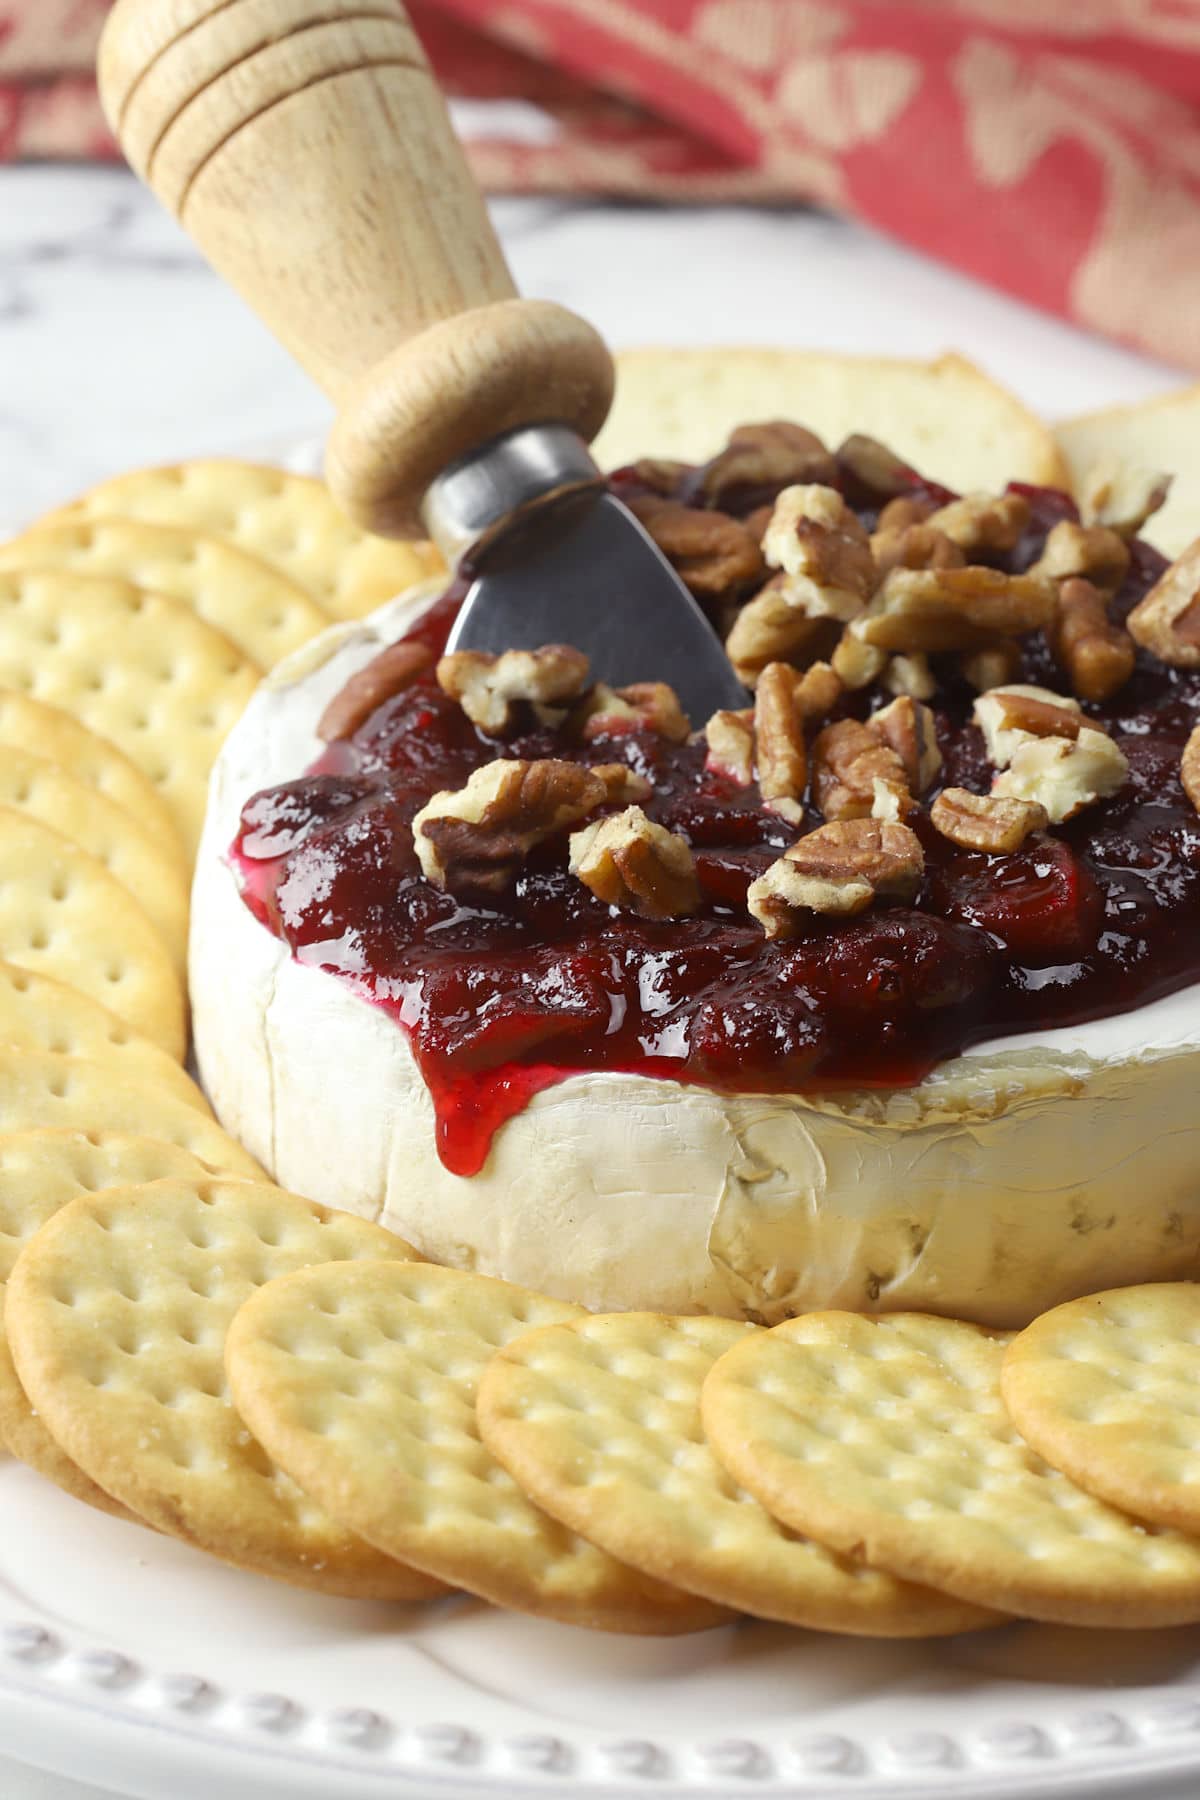 A whole wheel of brie cheese topped with cranberry sauce and pecans, with a serving knife and crackers.